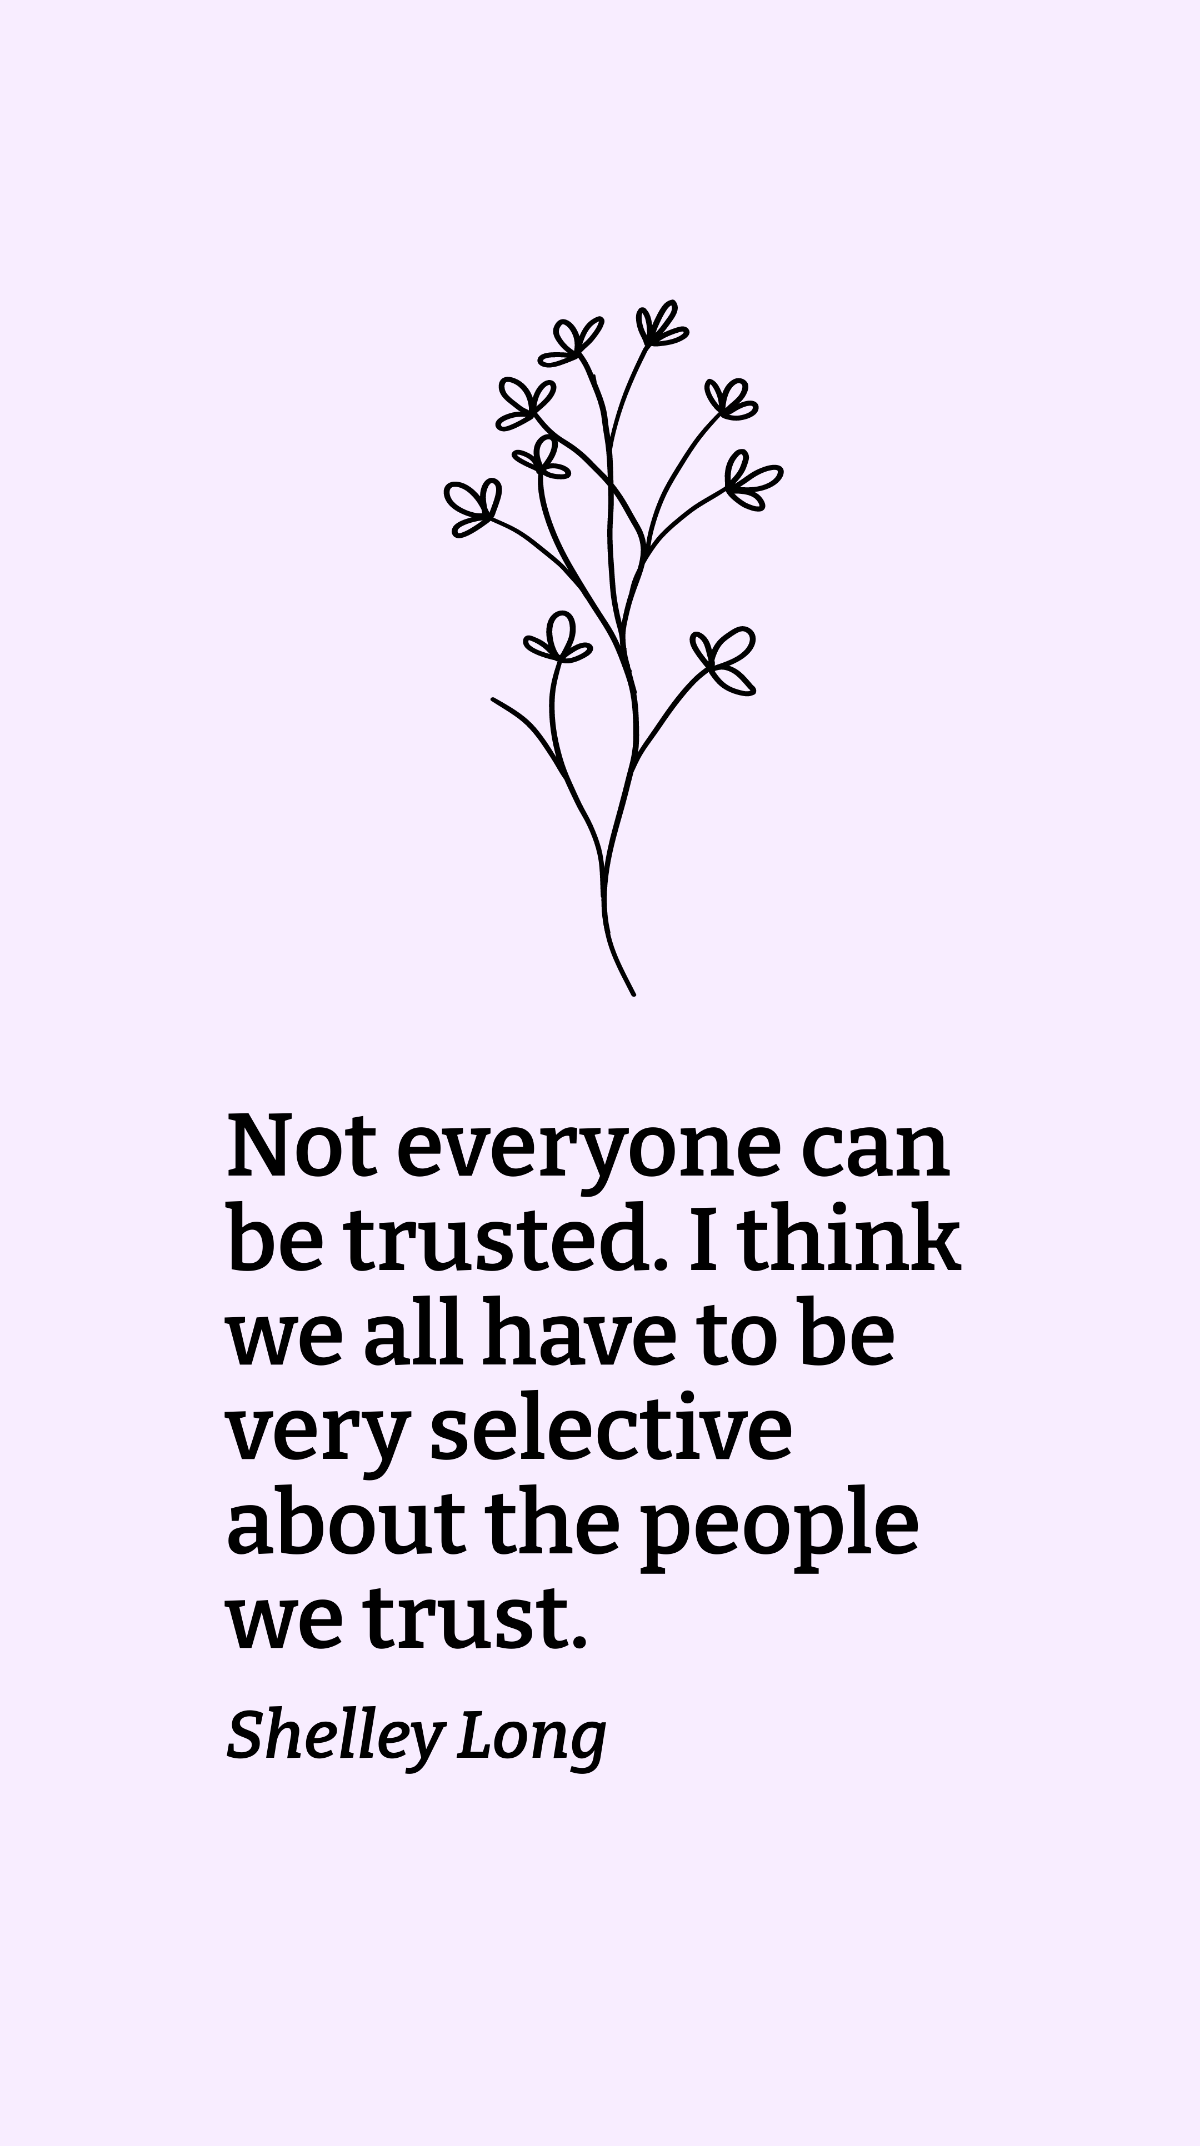 Shelley Long - Not everyone can be trusted. I think we all have to be very selective about the people we trust.